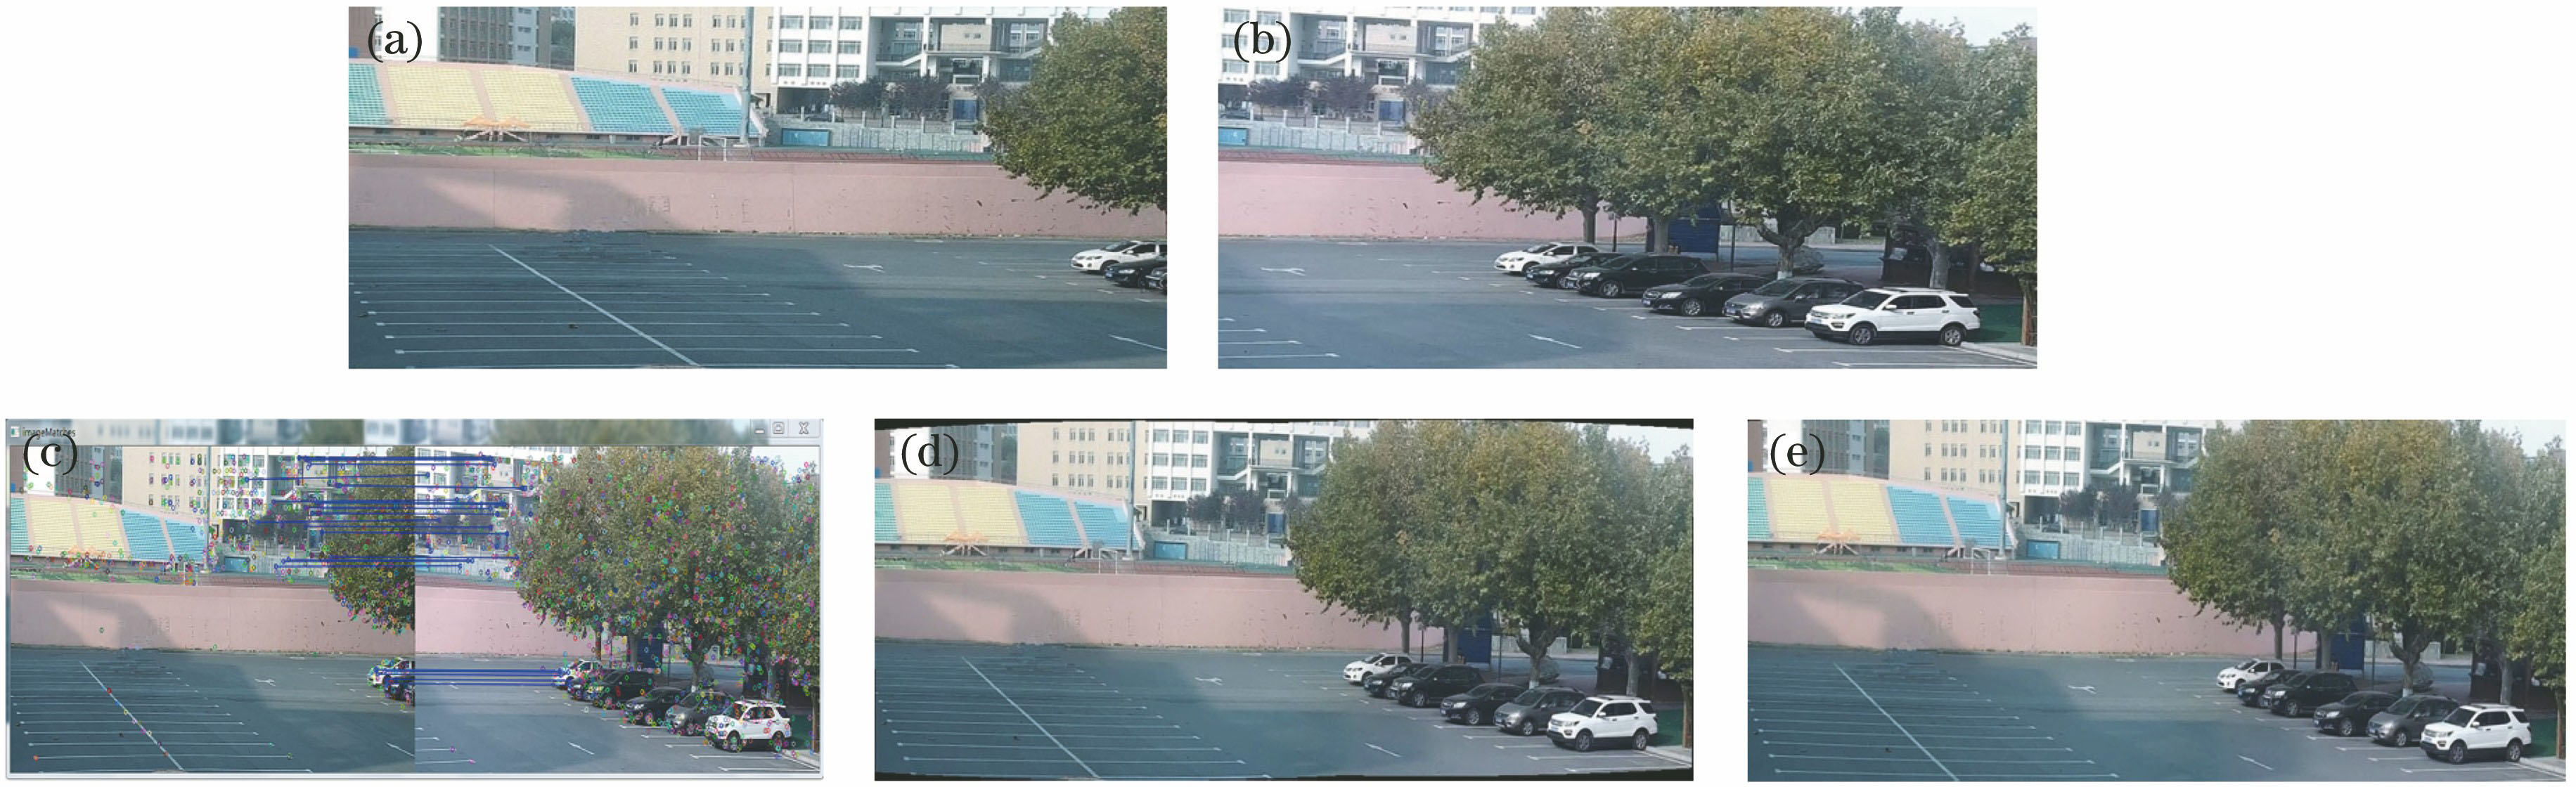 Results of visible light background image panorama stitching. (a) Original image 1; (b) original image 2; (c) feature point matching diagram; (d) stitching images; (e) stitching images after removing black areas